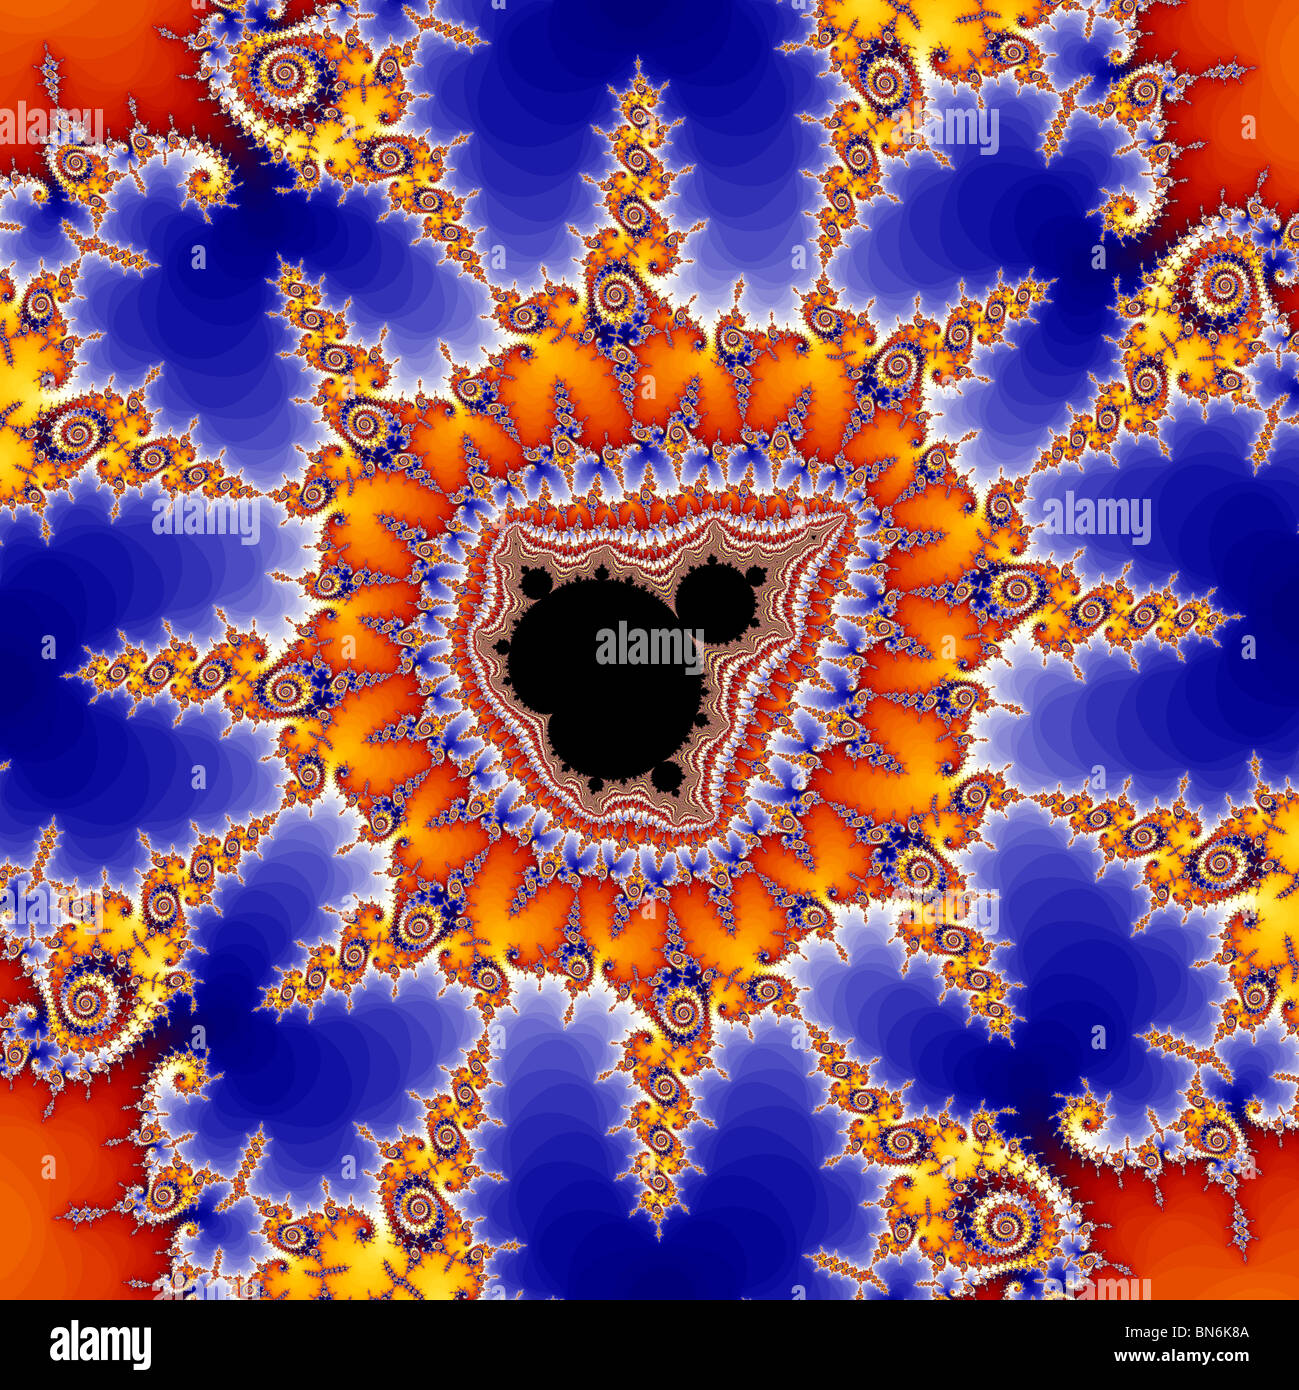 The Mandelbrot Set contains an infinite number of smaller copies of itself, surrounded by complex patterns. Stock Photo